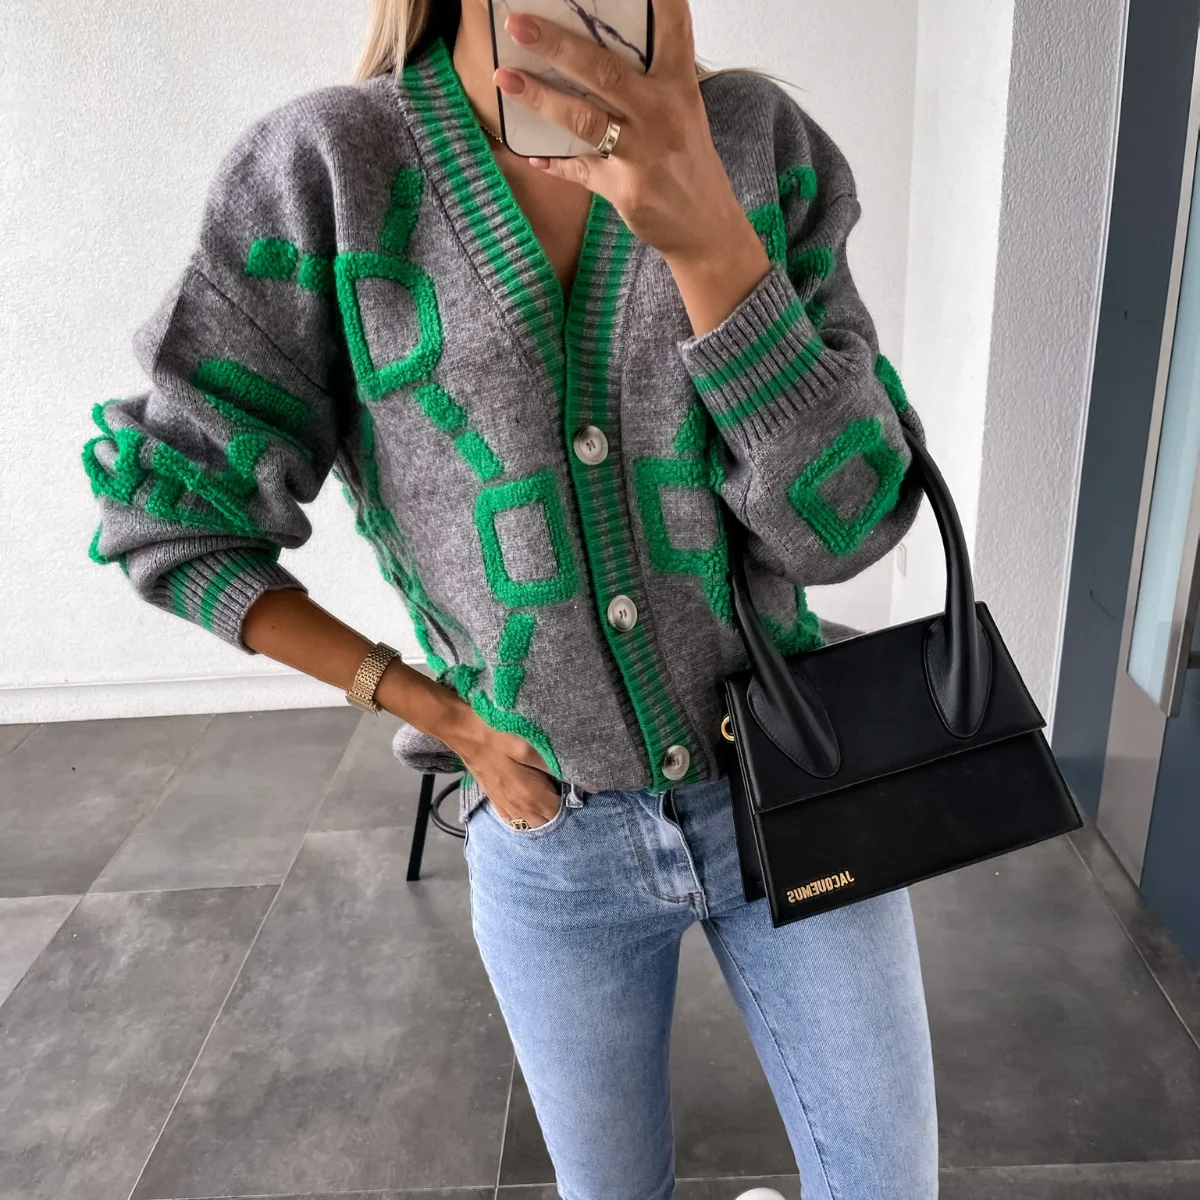 Women Autumn Winter New Loose Knitted Cardiagn Casual  V-neck Drop-shoulder Sleeve Sweater Coat Female Chic Crochet Outerwear